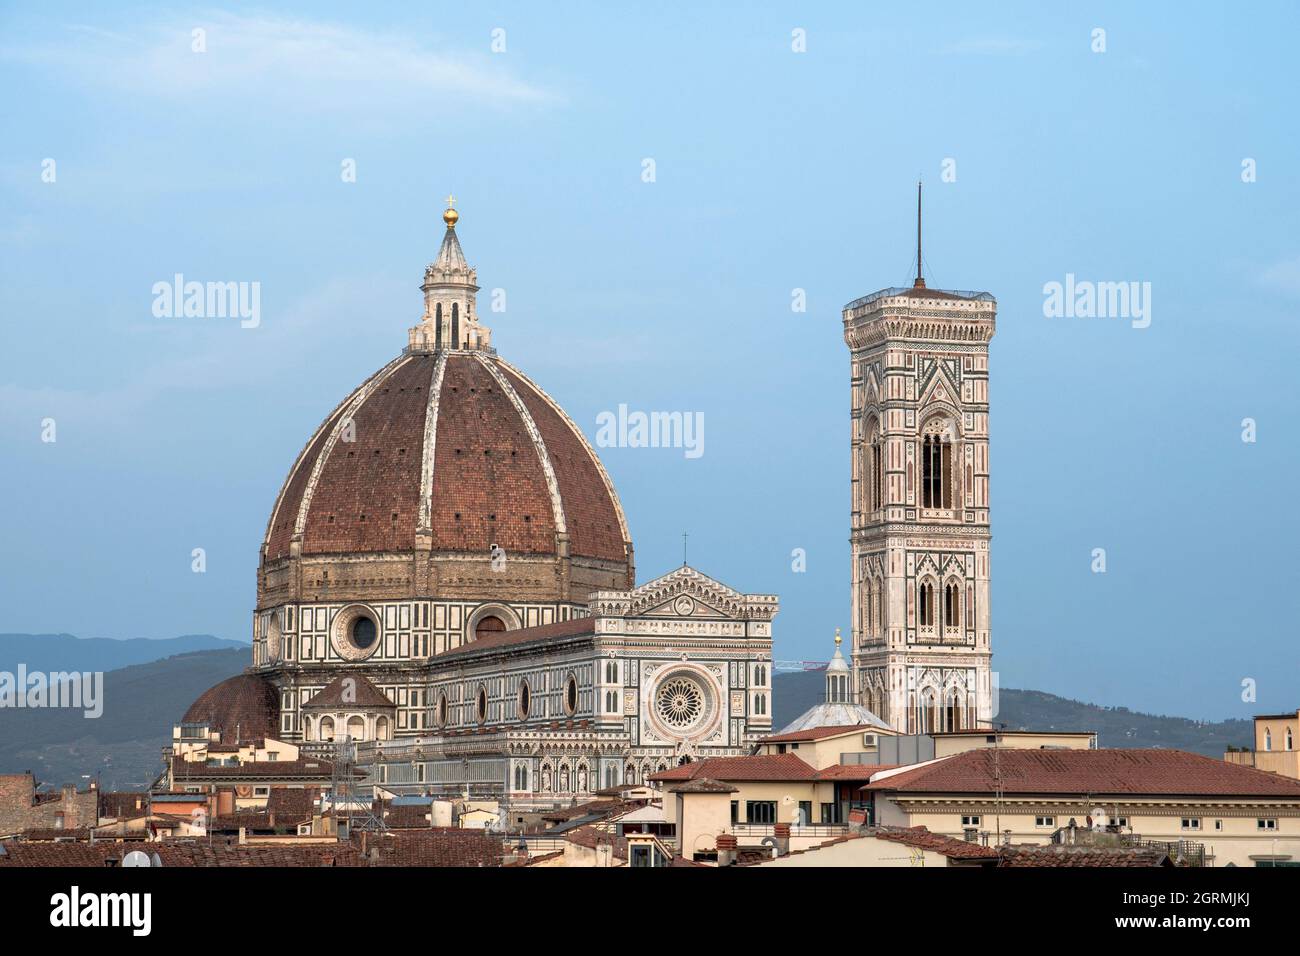 View of the Duomo and Giotto's bell tower from the rooftops of Florence Stock Photo